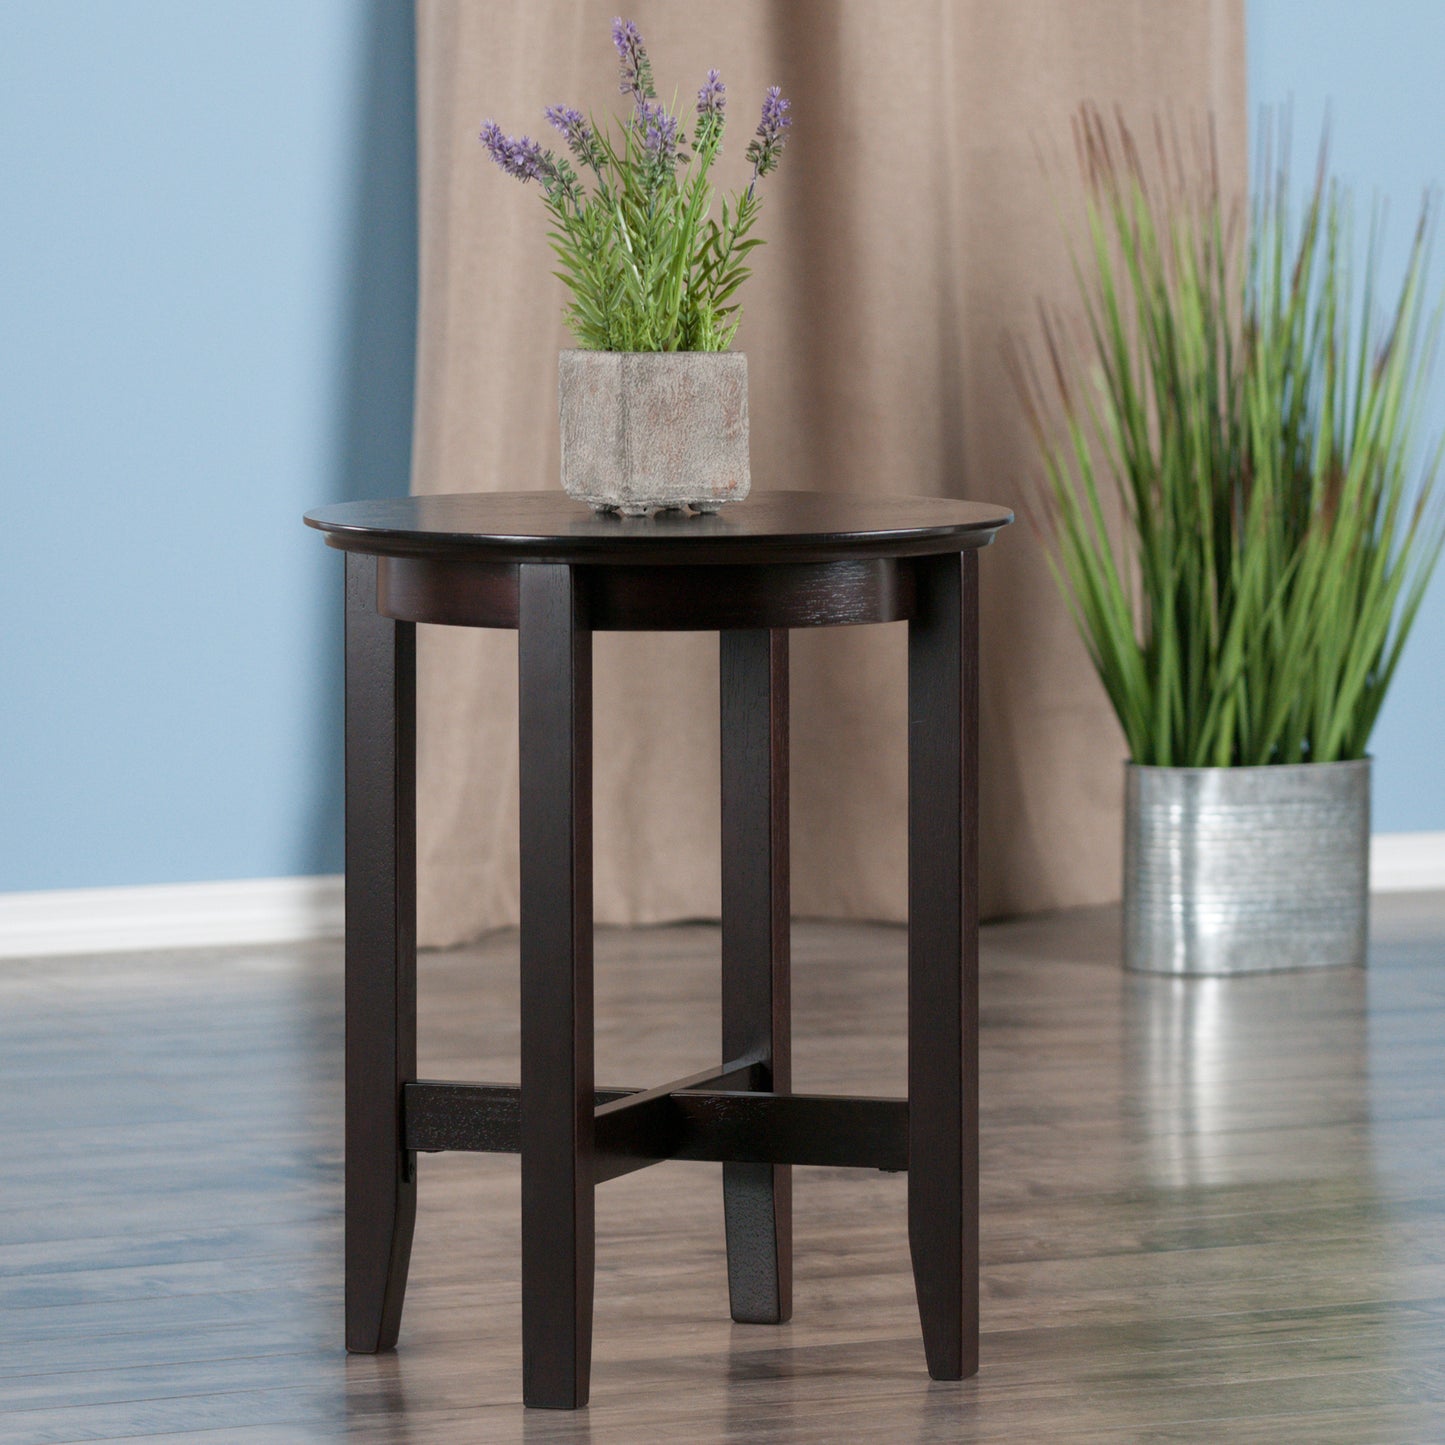 Toby Round Accent End Table, Espresso A